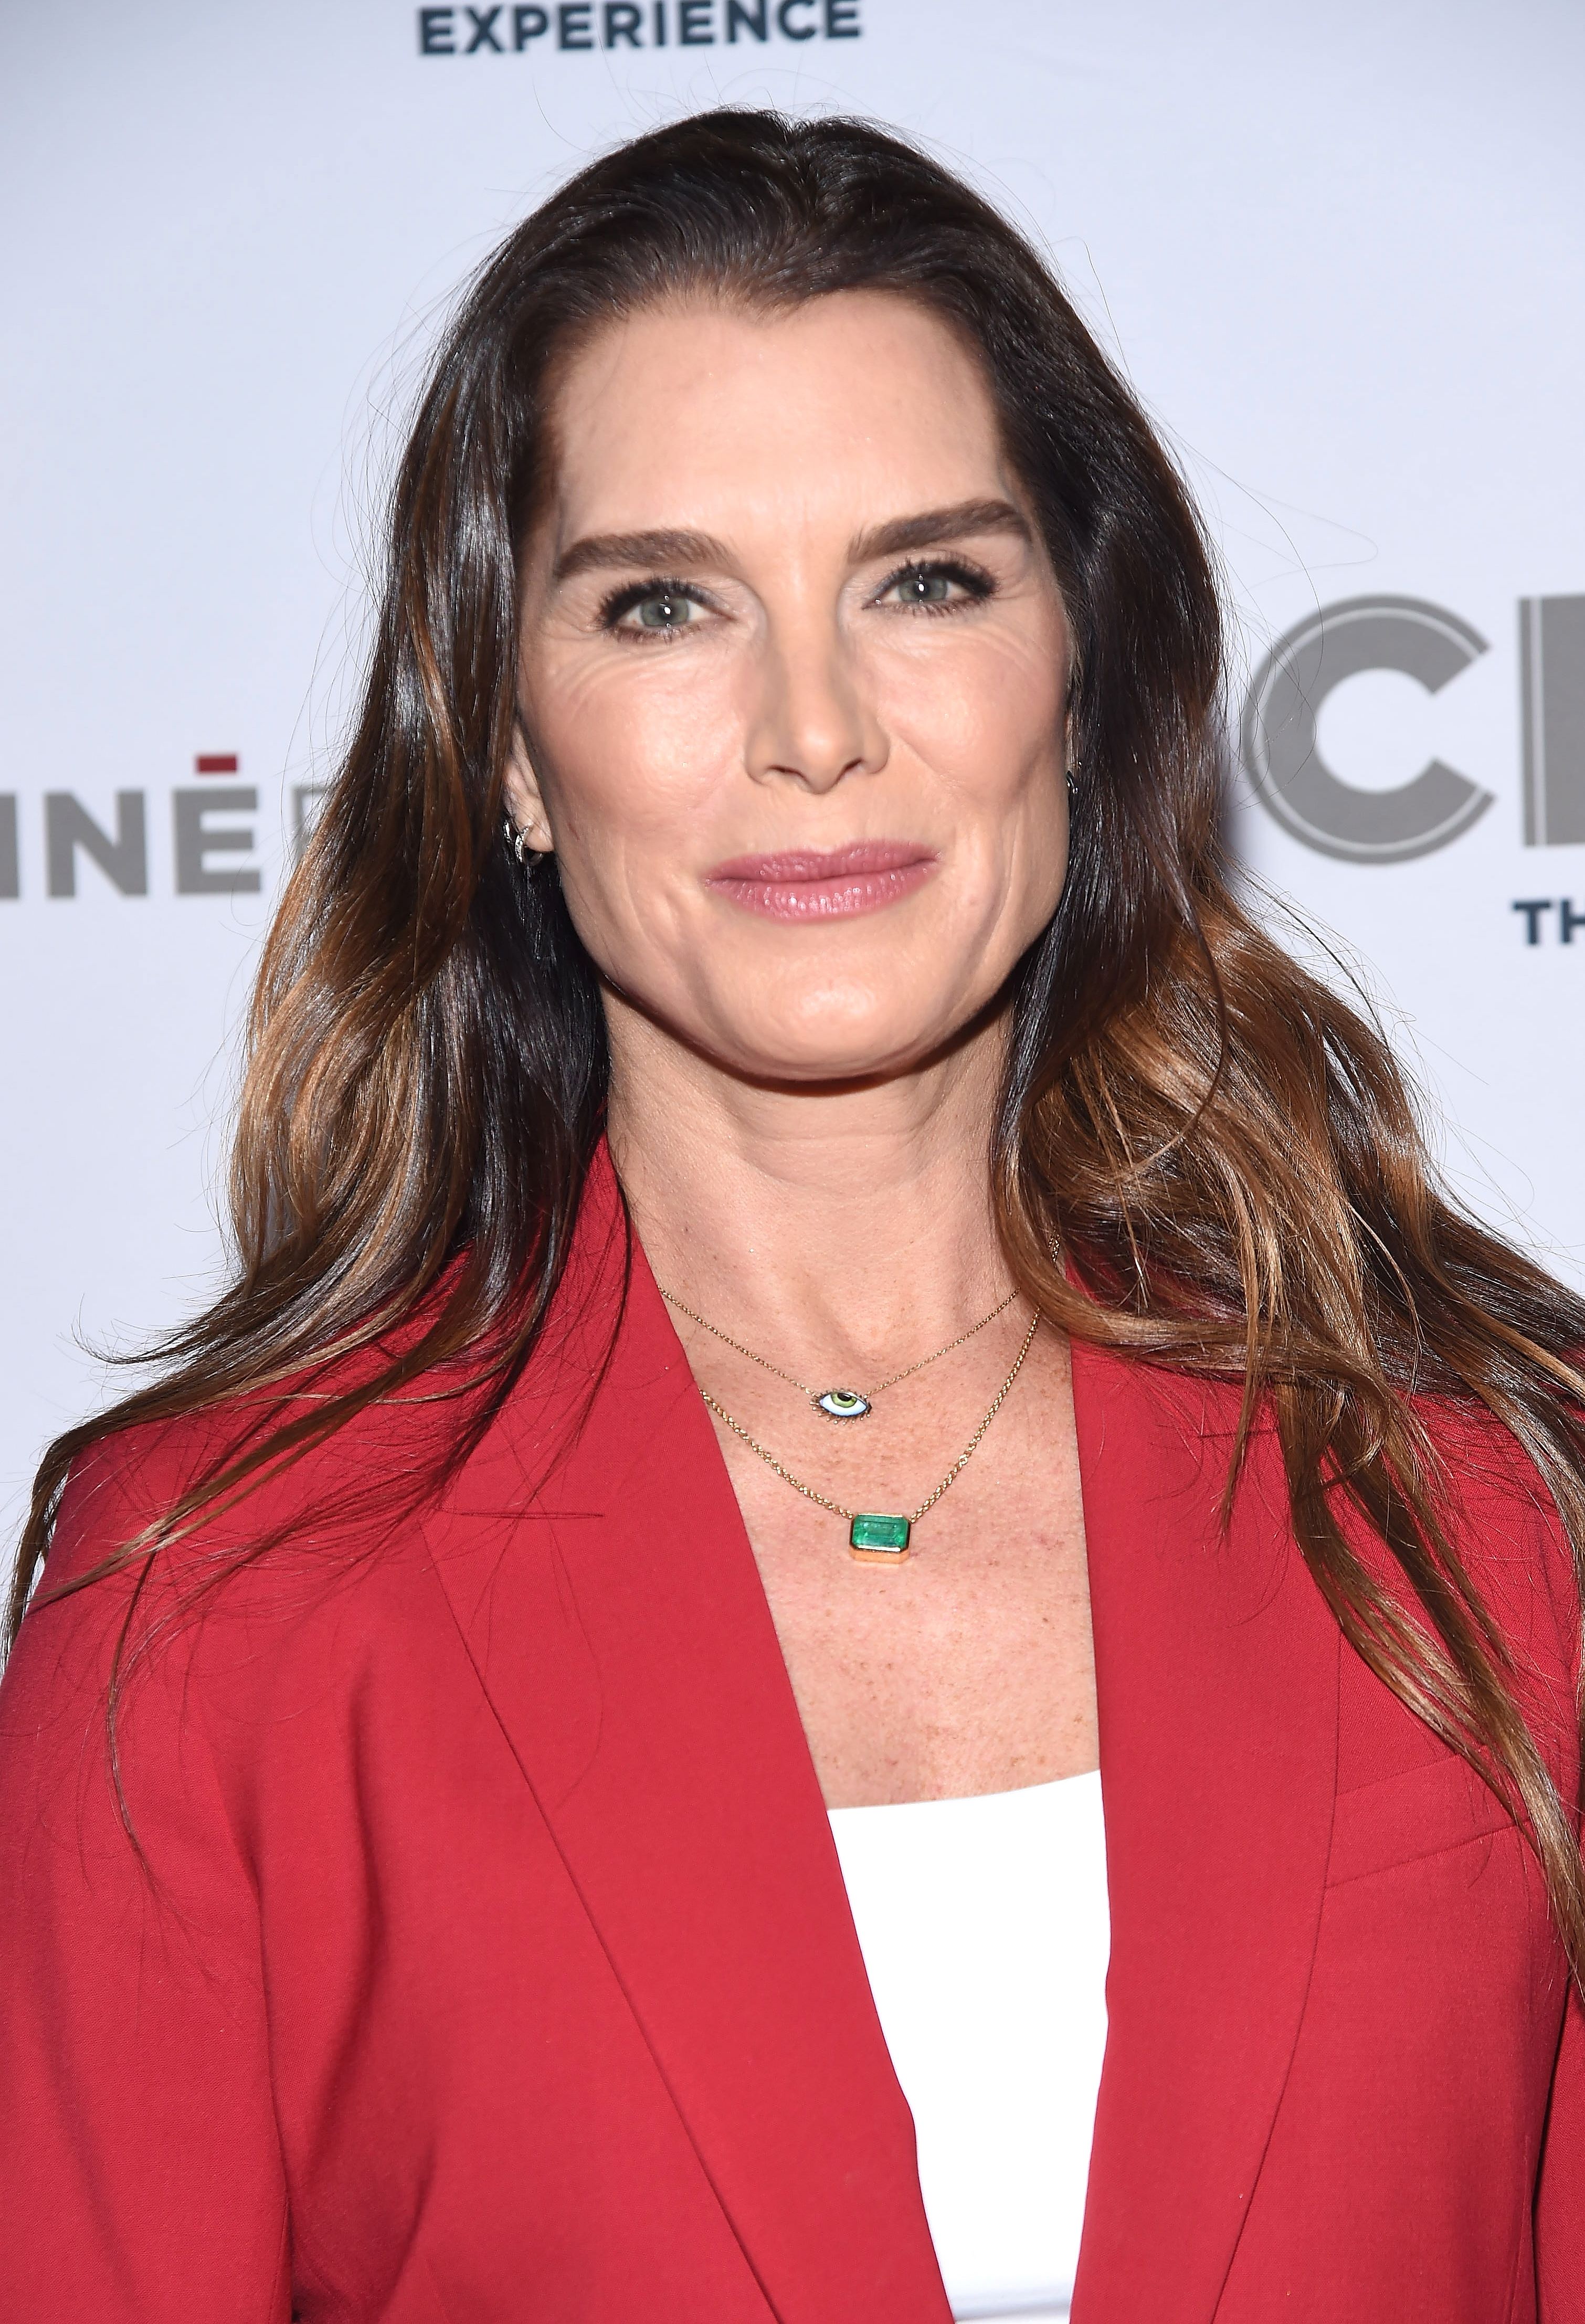 Brooke Shields during the CMX CineBistro openning at CMX CineBistro on November 7, 2018, in New York City. | Source: Getty Images